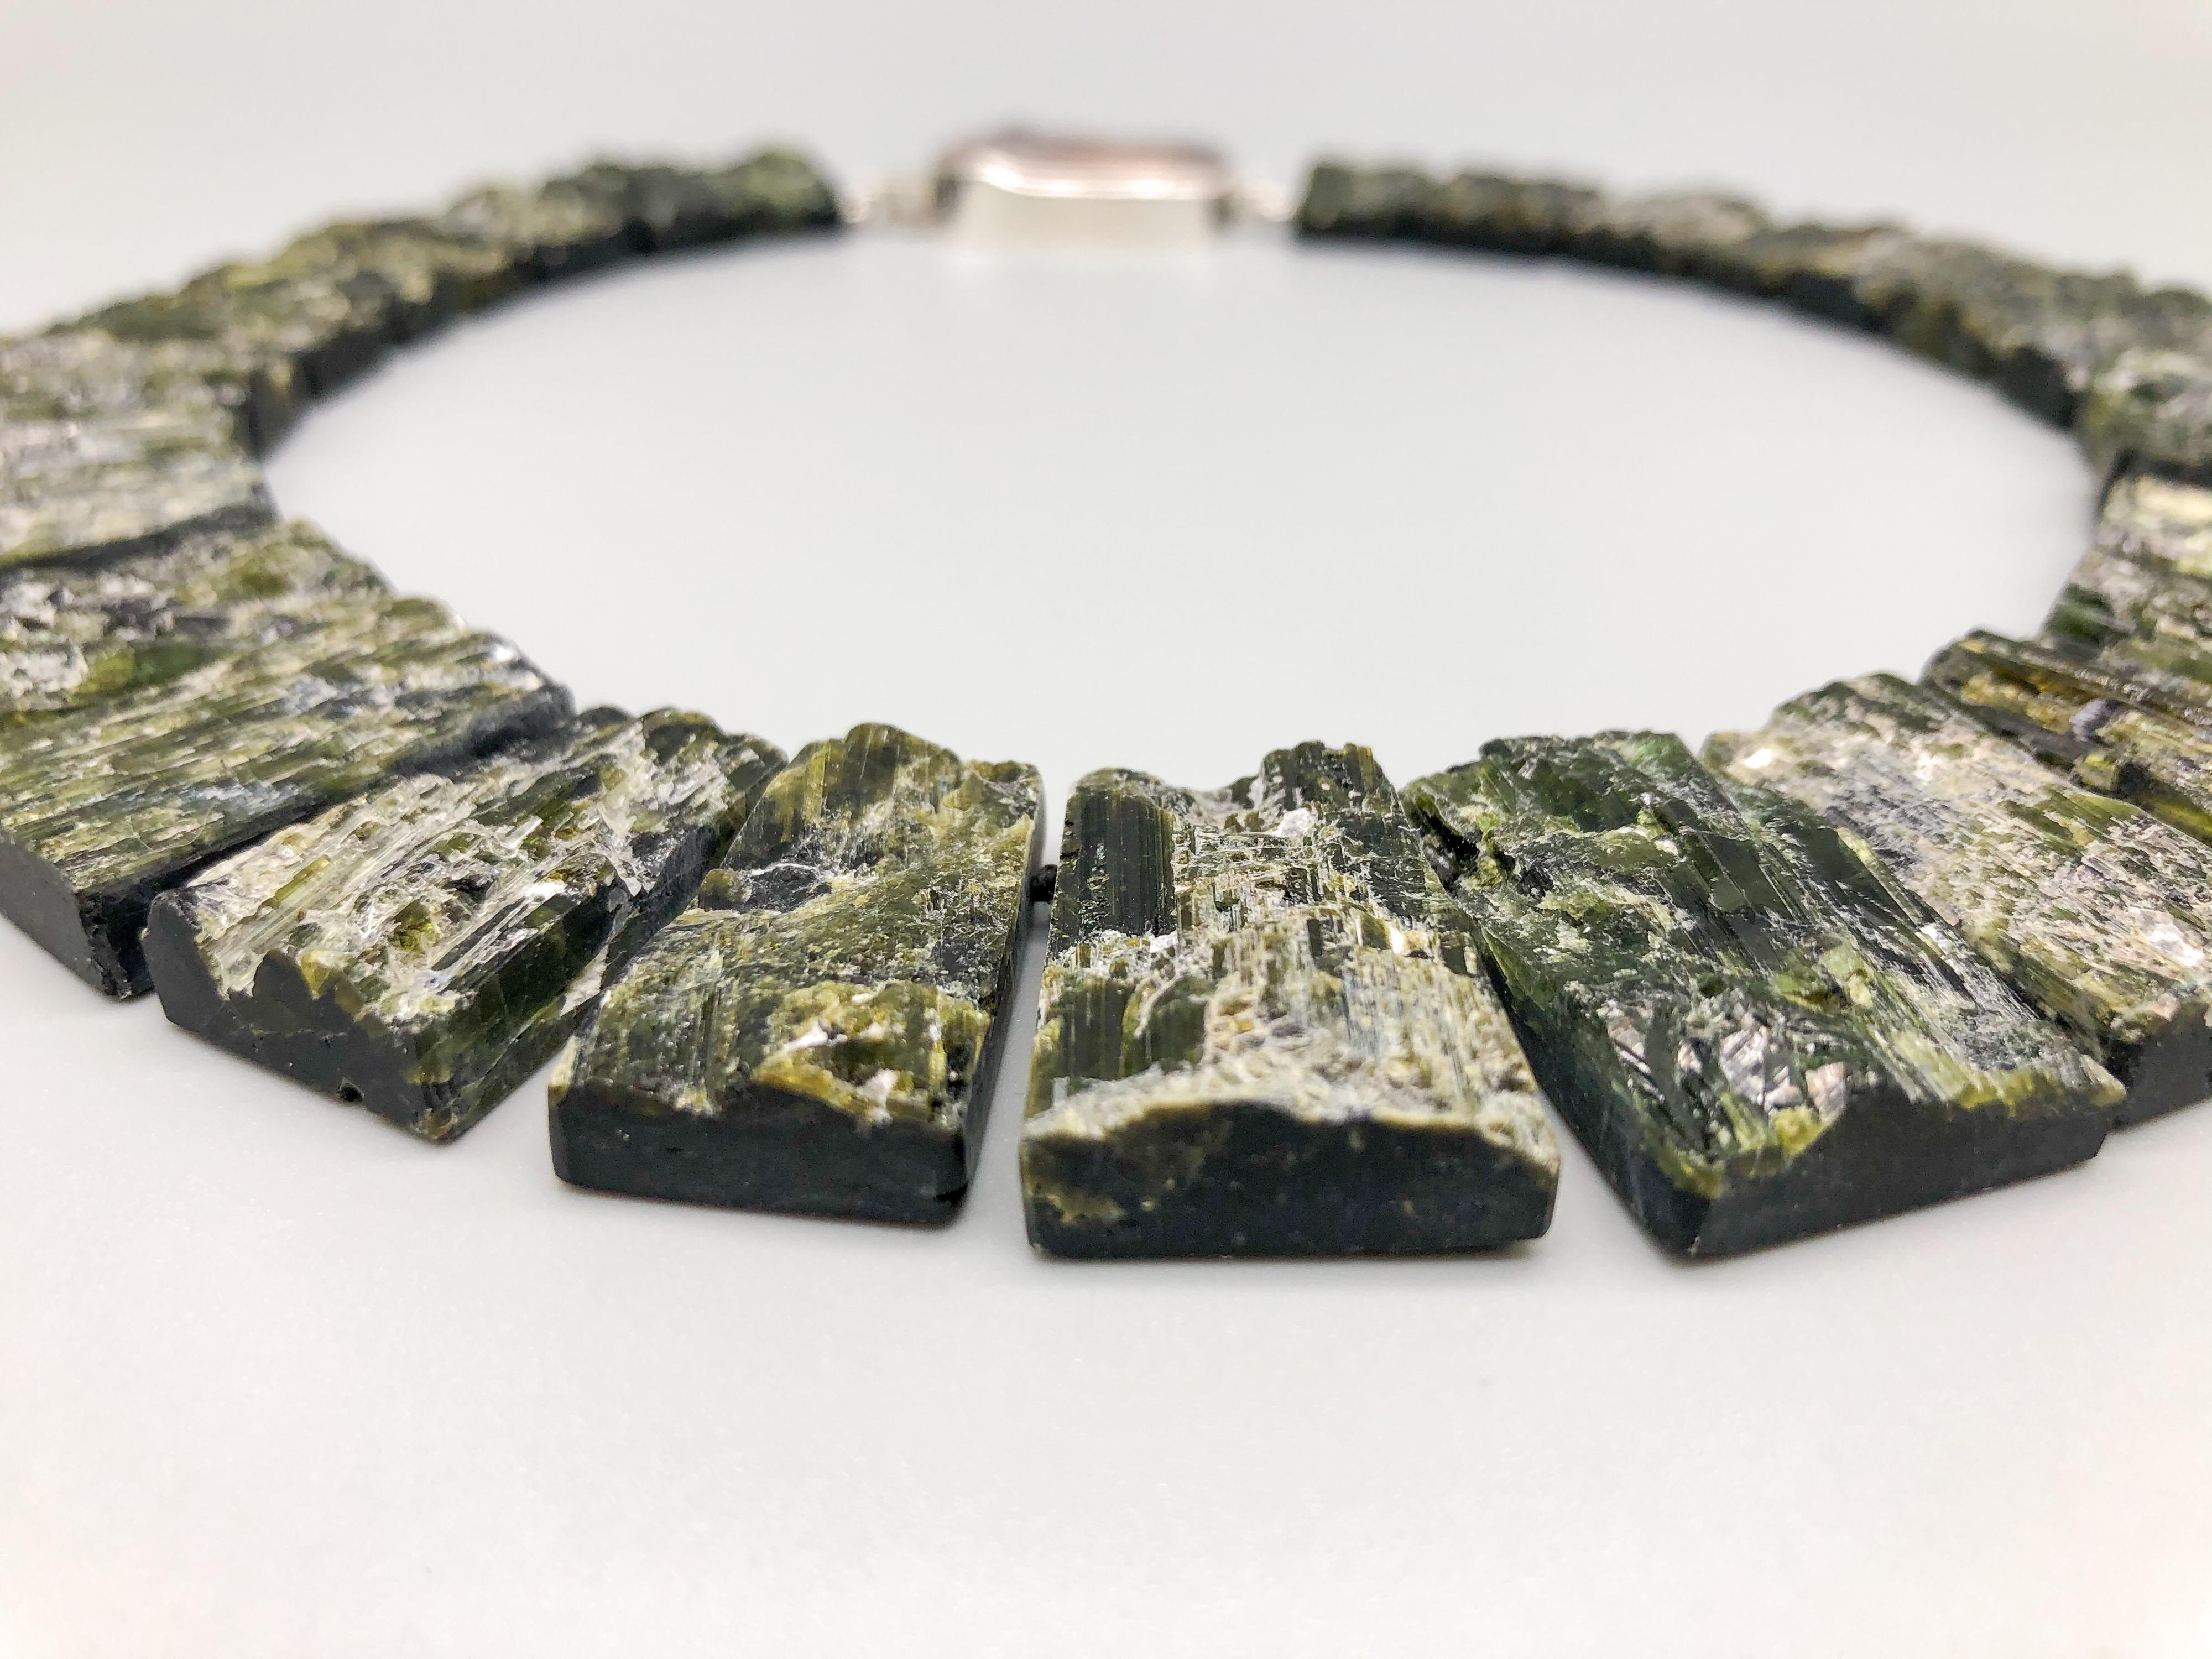 Contemporary A.Jeschel Black Tourmaline—The most powerful stone of all in a matched collar 